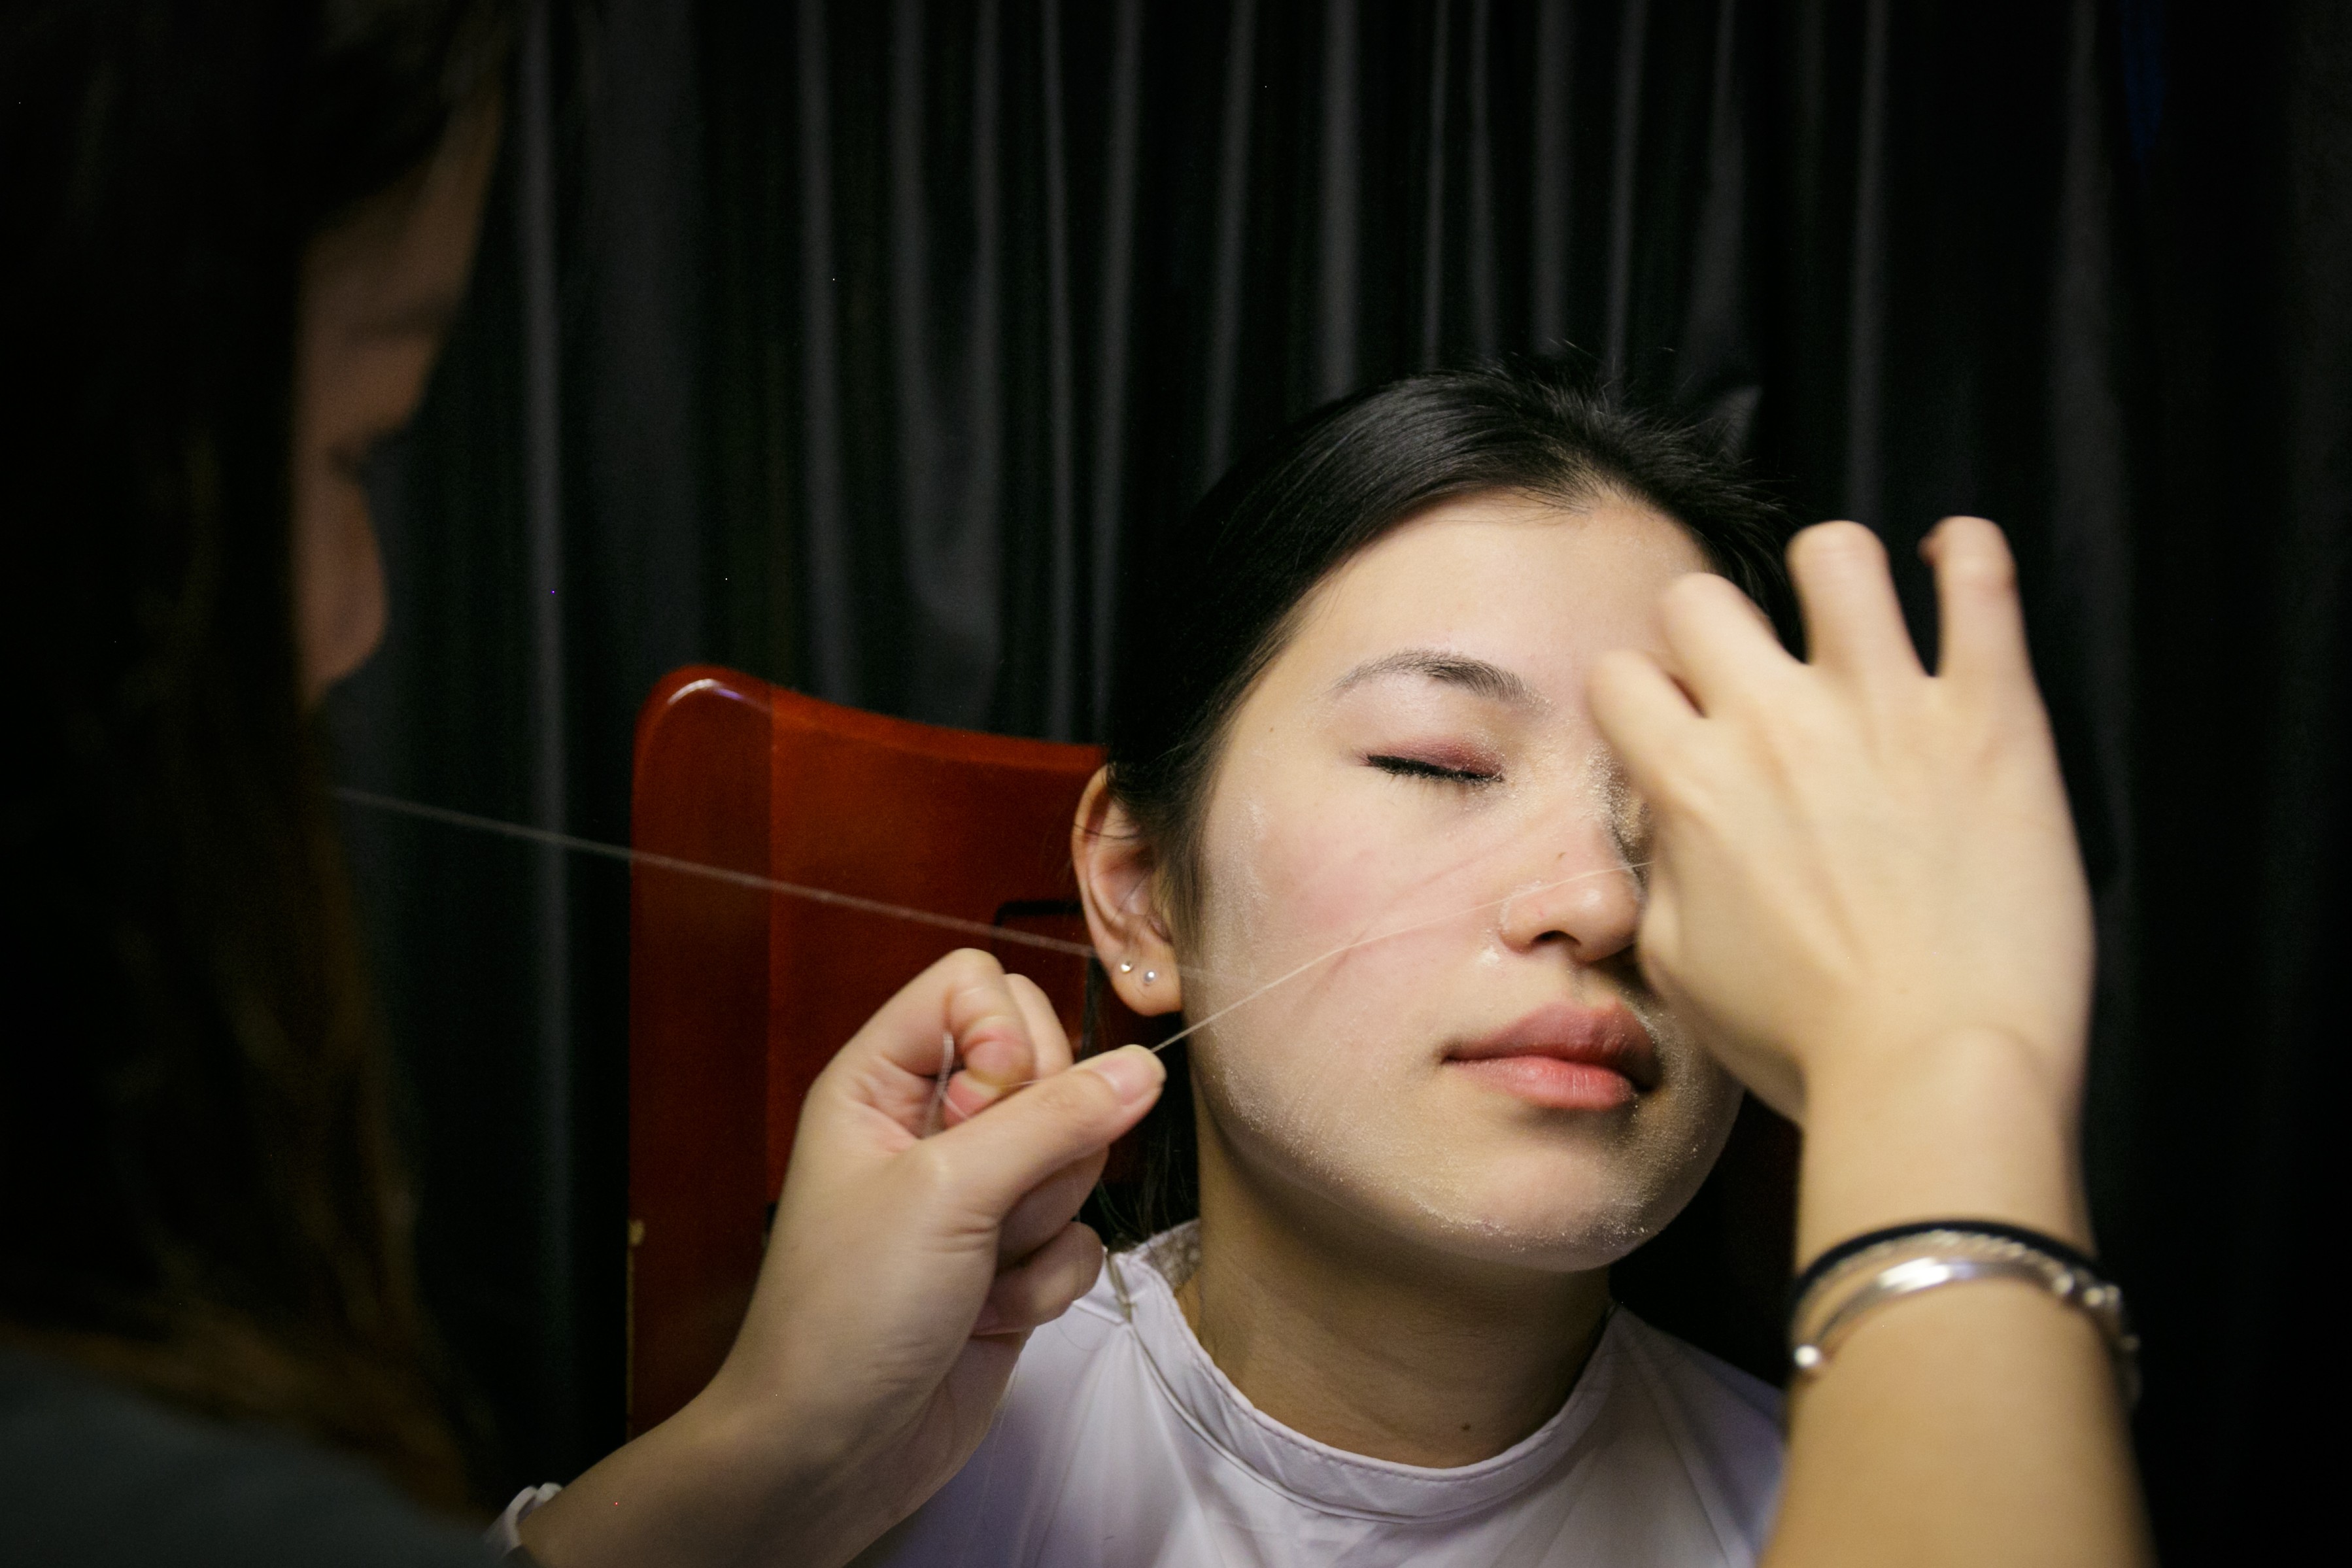 Moona Kwok, 24, inherited the face threading business from her mother, but knows of few other people her age practising it. Photo: Tessa Chan